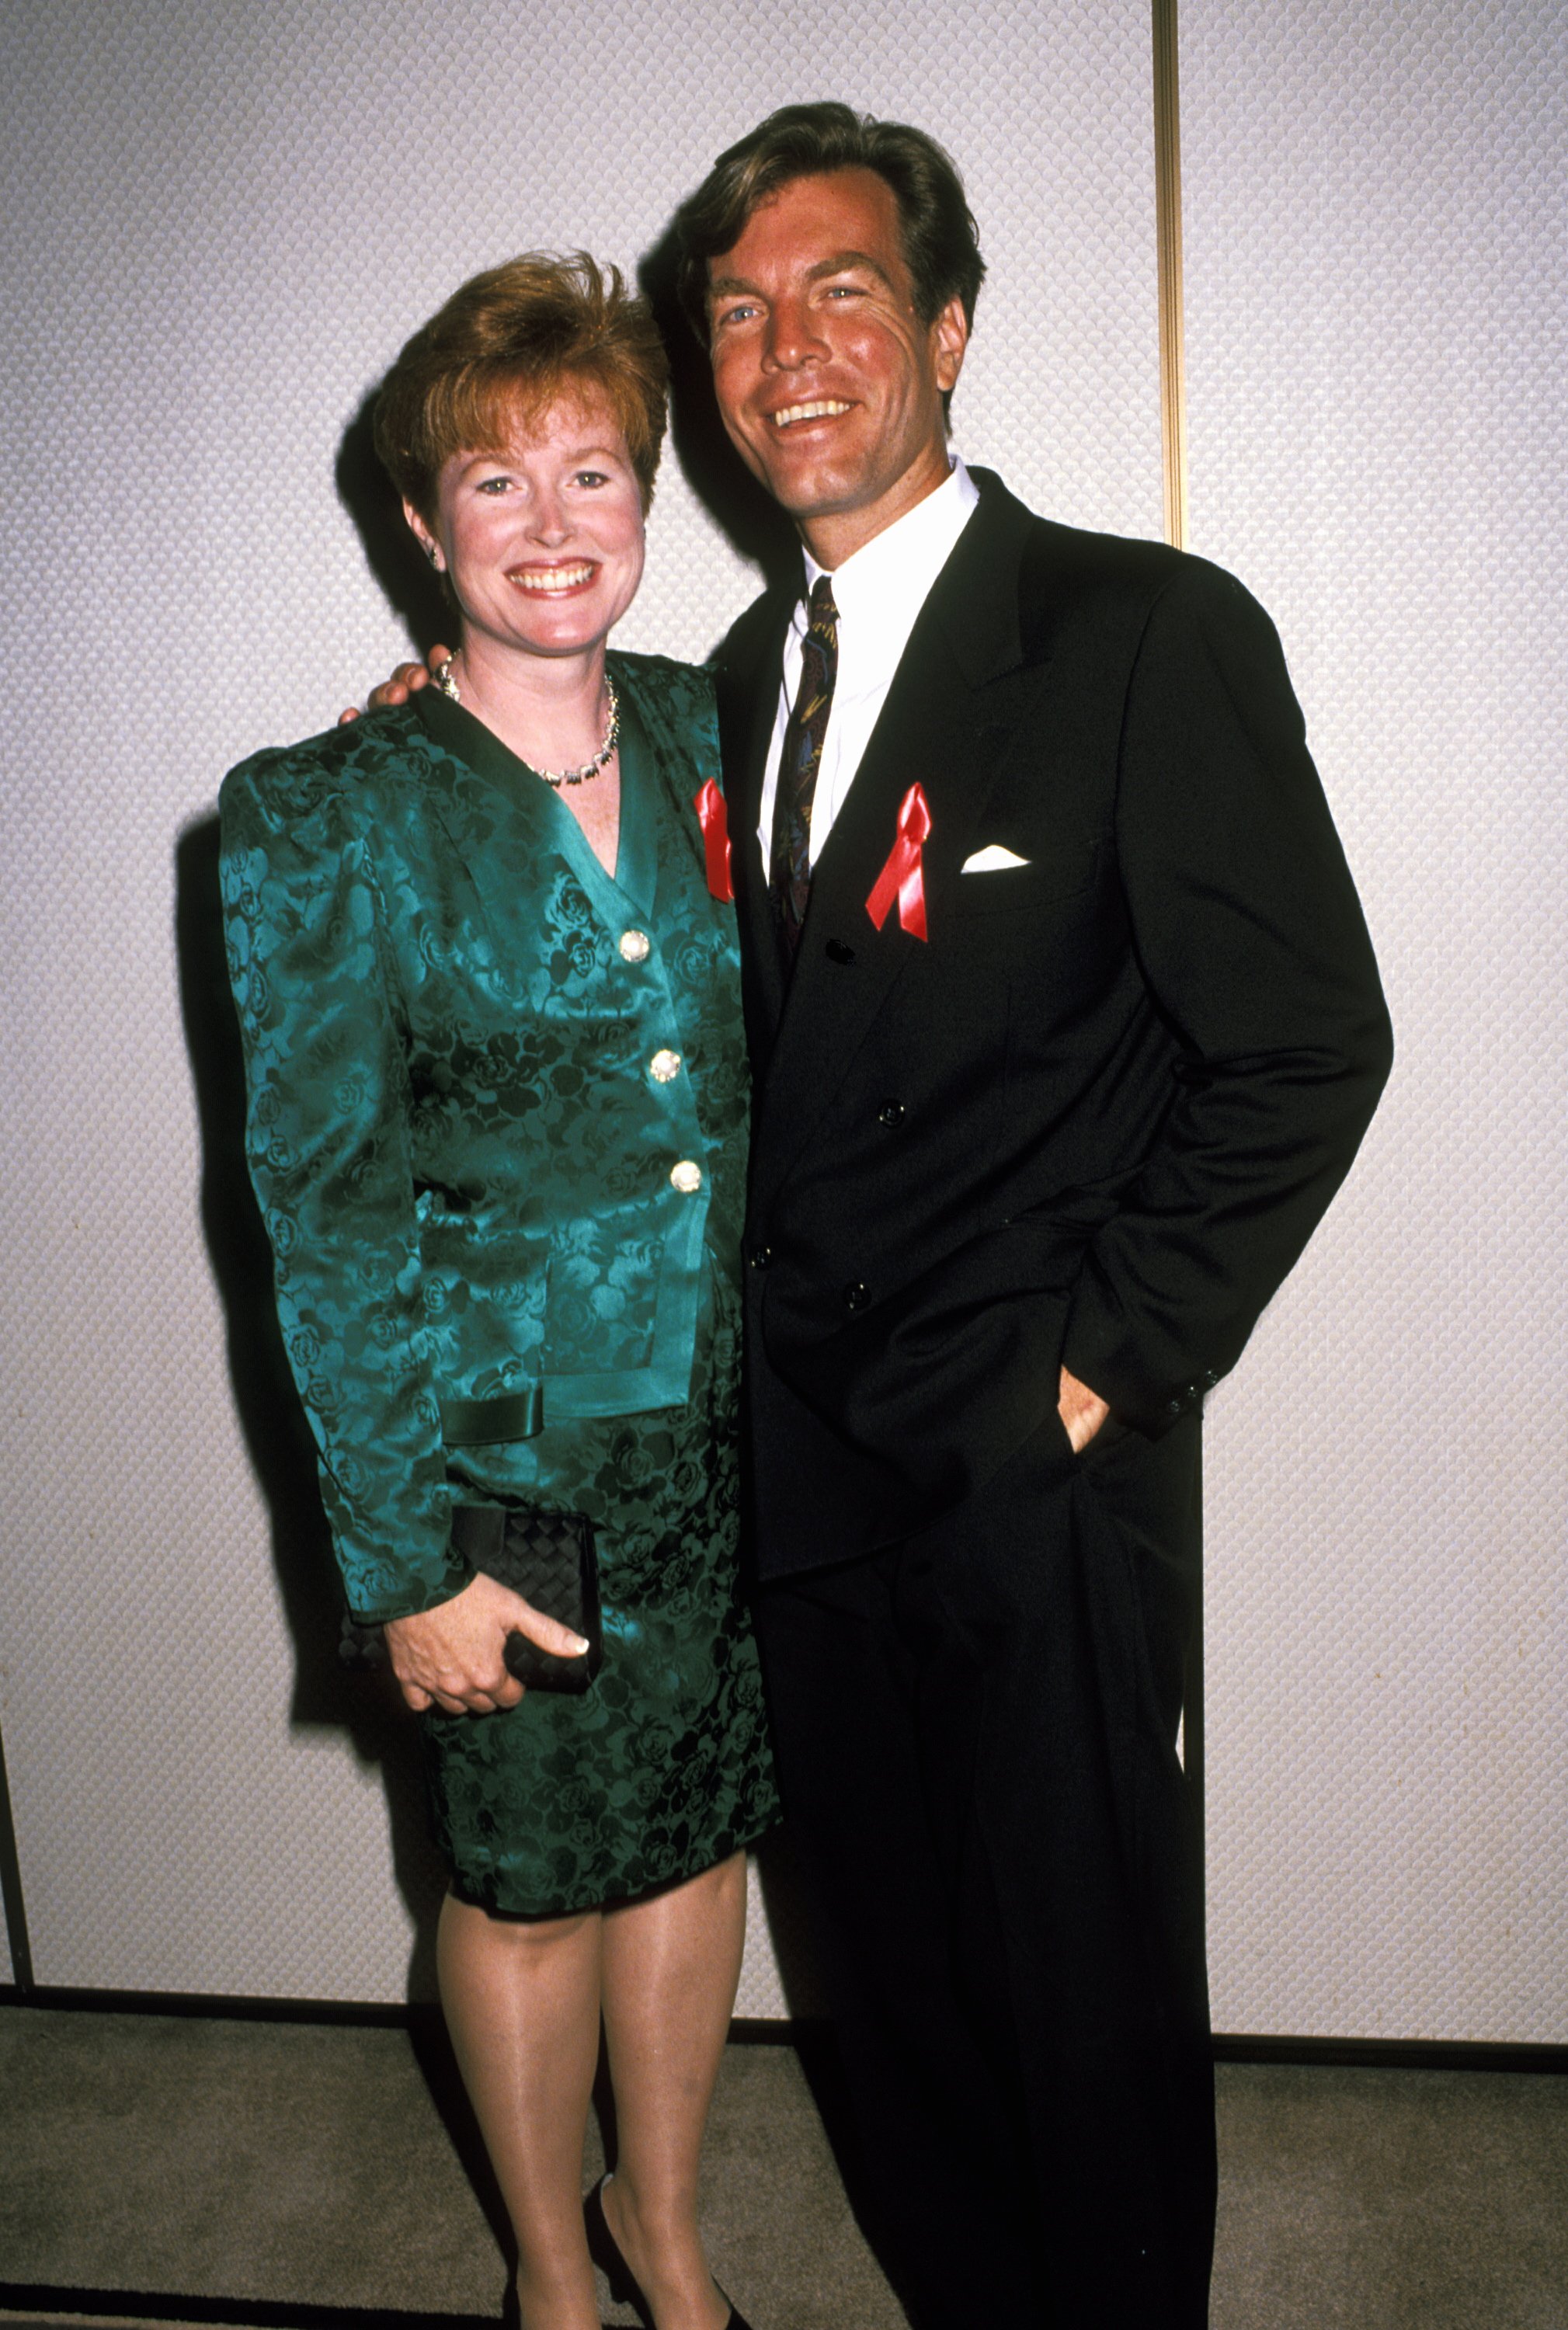  Peter Bergman and wife attend Daytime Emmy Non-Televised Awards on June 20, 1992 at the Universal Sheraton Hotel in Universal City, California | Source: Getty Images